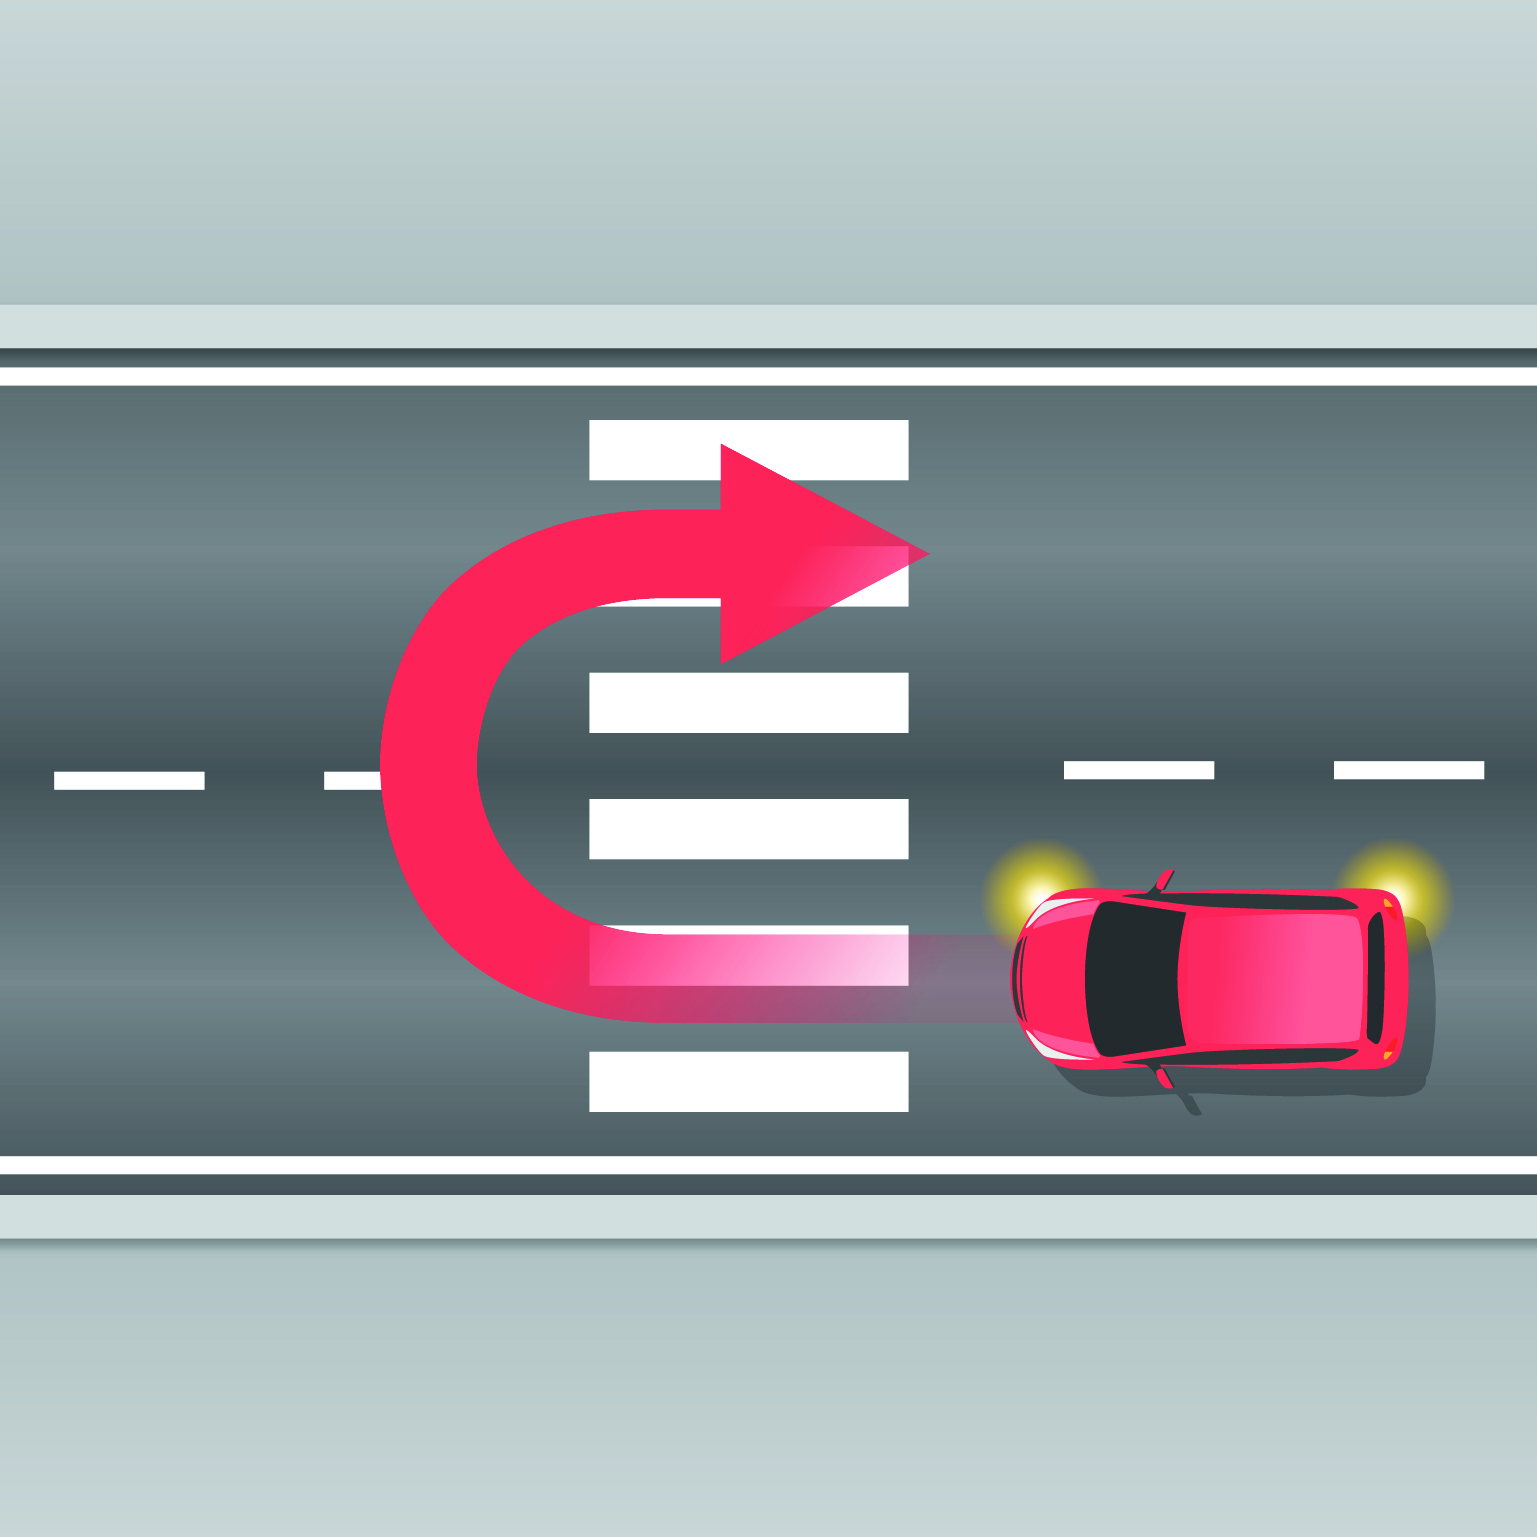 A car making a U-turn at a pedestrian crossing, going back the same direction it came from